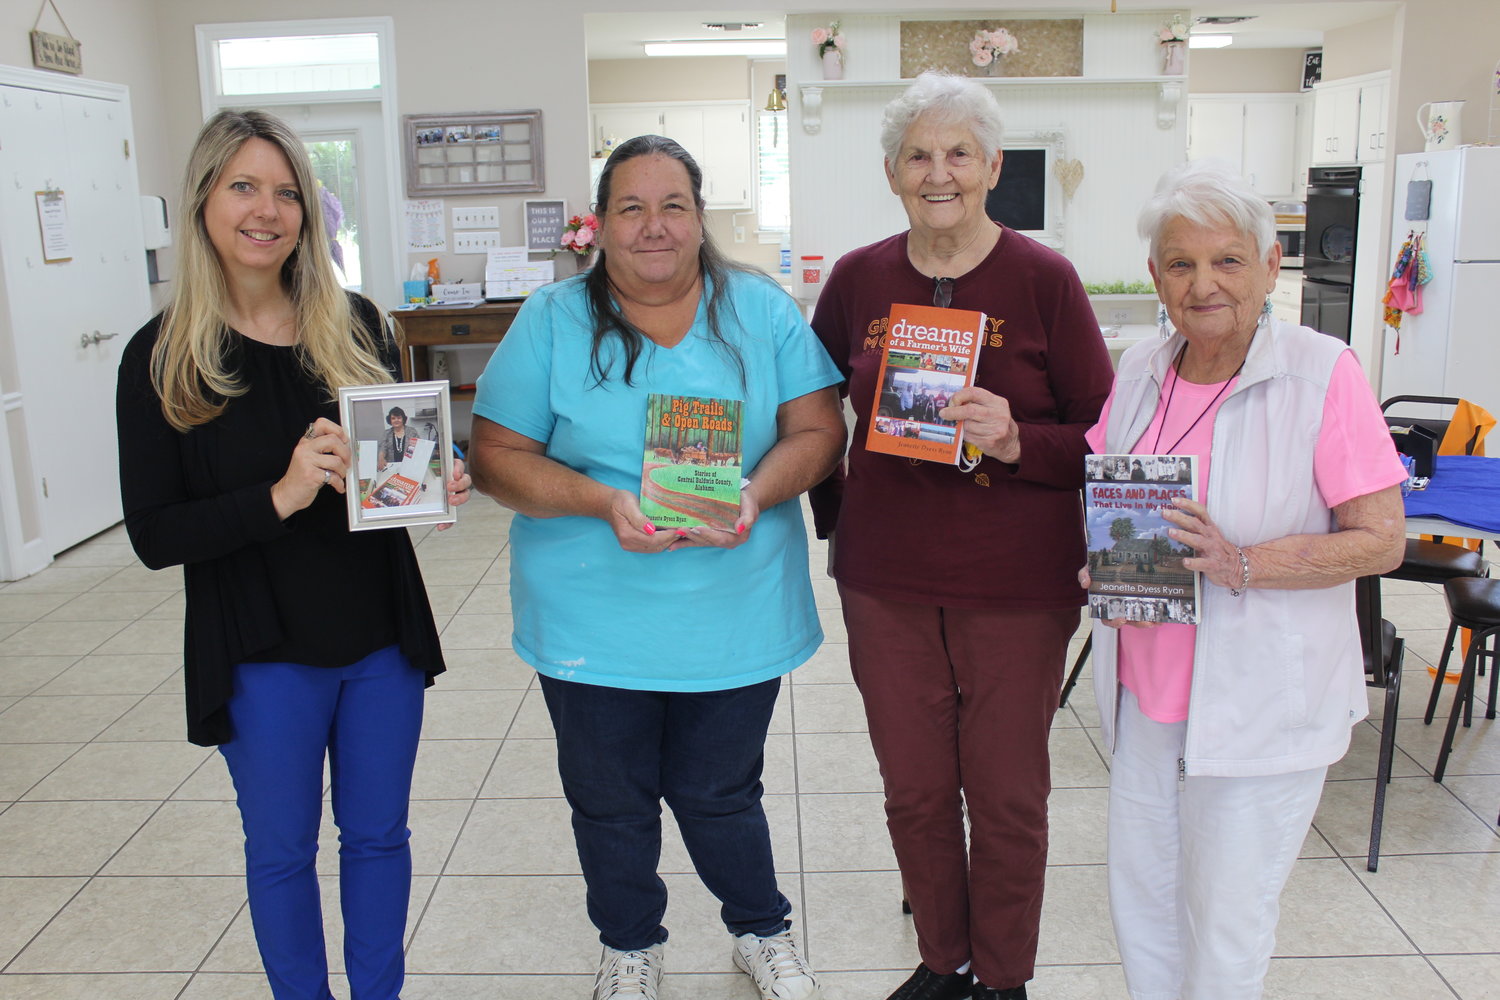 Twila Unsderfer, daughter of author Jeanette Ryan, brings signed copies of Ryan’s books to the George P. Thames Adult Activity Center in Robertsdale. Pictured with, from left, Mary Williams, Eddie Joan Bedwell and Dot Thorne.